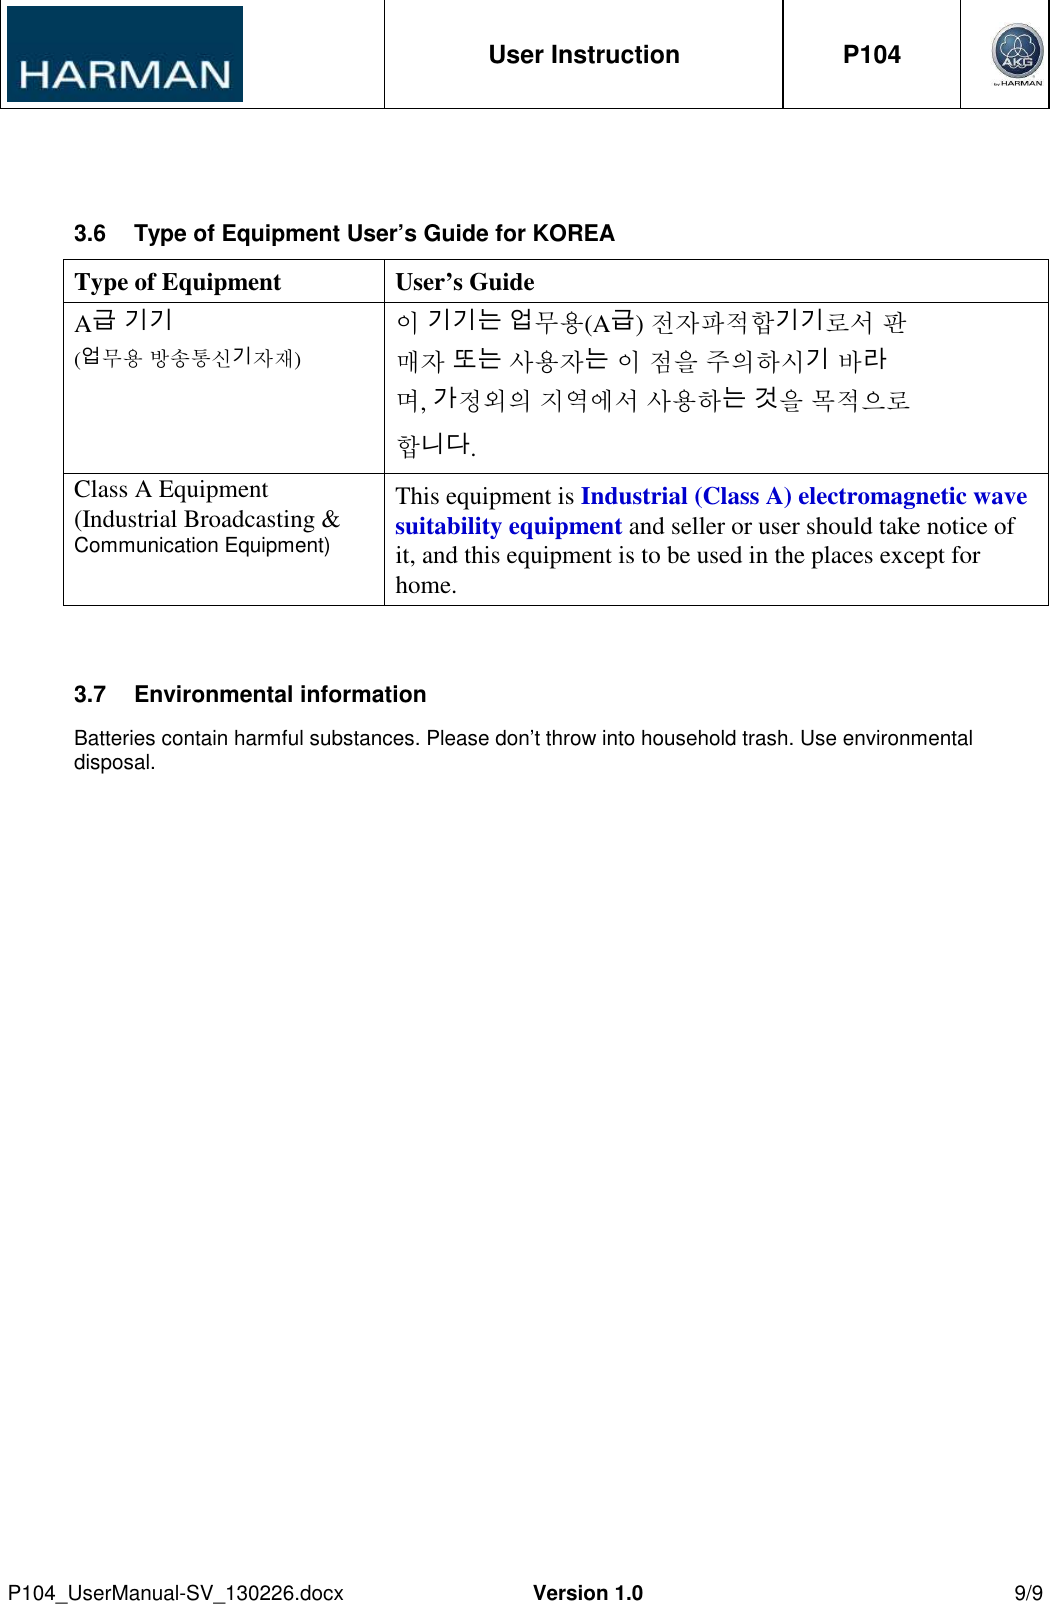  User Instruction  P104     P104_UserManual-SV_130226.docx  Version 1.0  9/9   3.6  Type of Equipment User’s Guide for KOREA Type of Equipment User’s Guide A급 기기 (업무용 방송통신기자재) 이 기기는 업무용(A급) 전자파적합기기로서 판 매자 또는 사용자는 이 점을 주의하시기 바라 며, 가정외의 지역에서 사용하는 것을 목적으로 합니다. Class A Equipment (Industrial Broadcasting &amp; Communication Equipment) This equipment is Industrial (Class A) electromagnetic wave suitability equipment and seller or user should take notice of it, and this equipment is to be used in the places except for home.  3.7  Environmental information Batteries contain harmful substances. Please don’t throw into household trash. Use environmental disposal.   